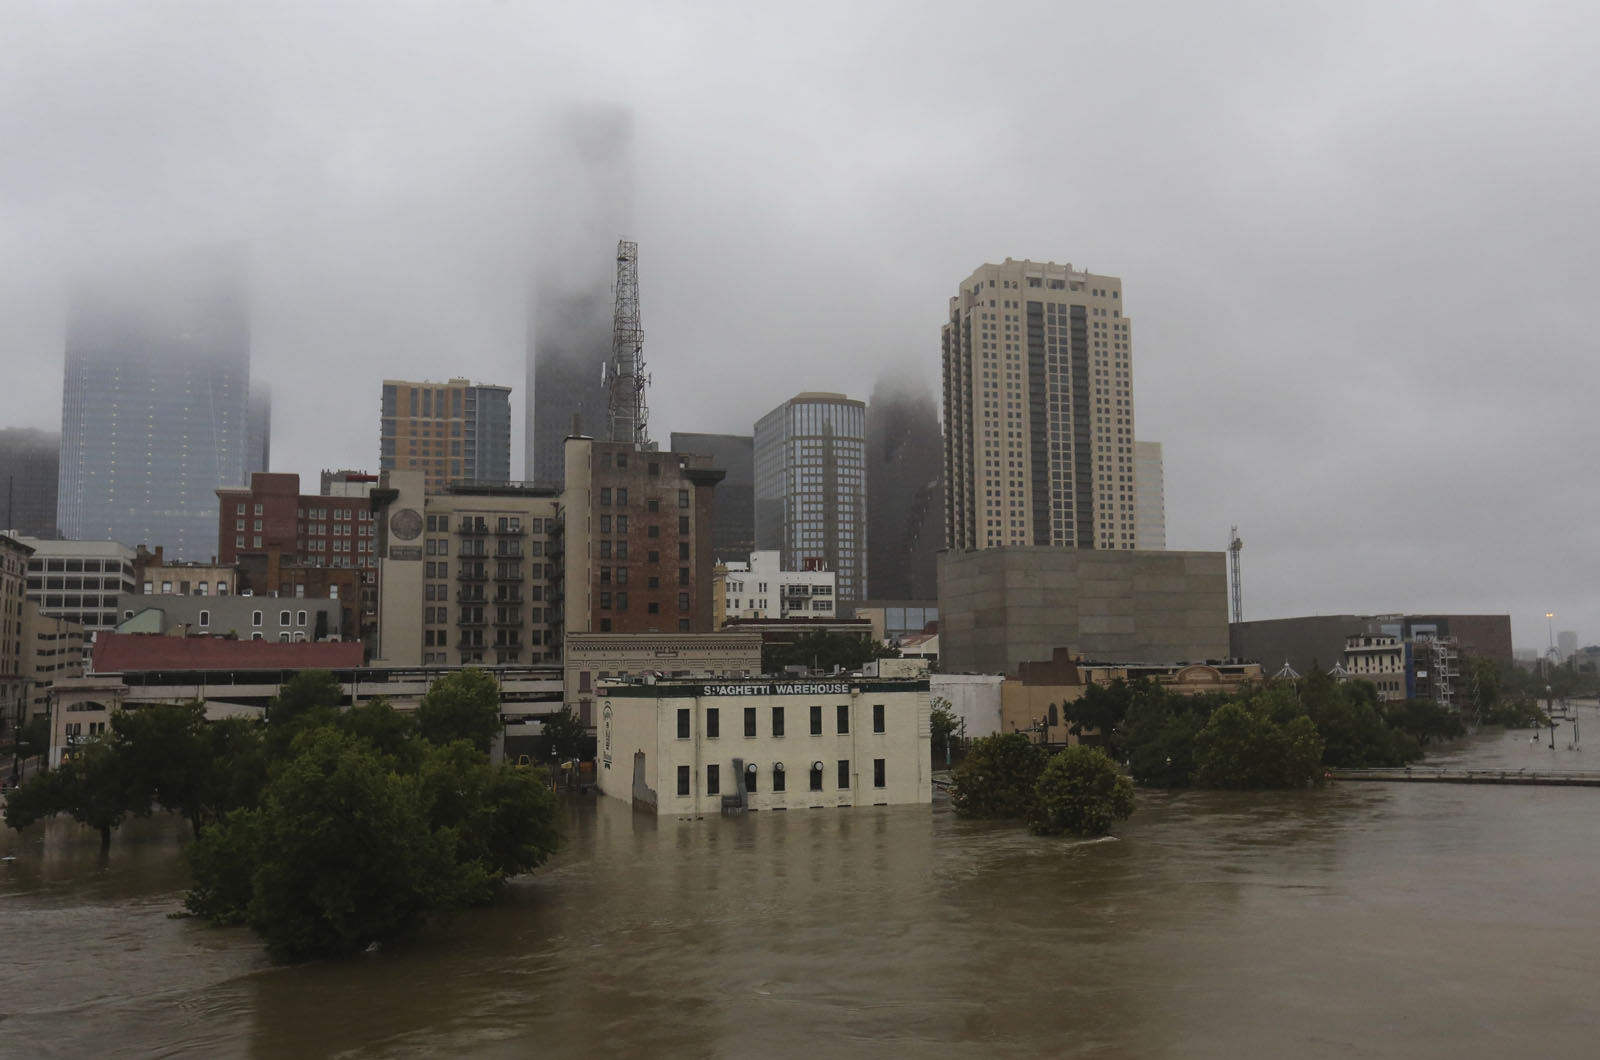 Floodwaters from Tropical Storm Harvey flow in the Buffalo Bayou in downtown Houston, Texas, Monday, Aug. 28, 2017. (AP Photo/LM Otero)